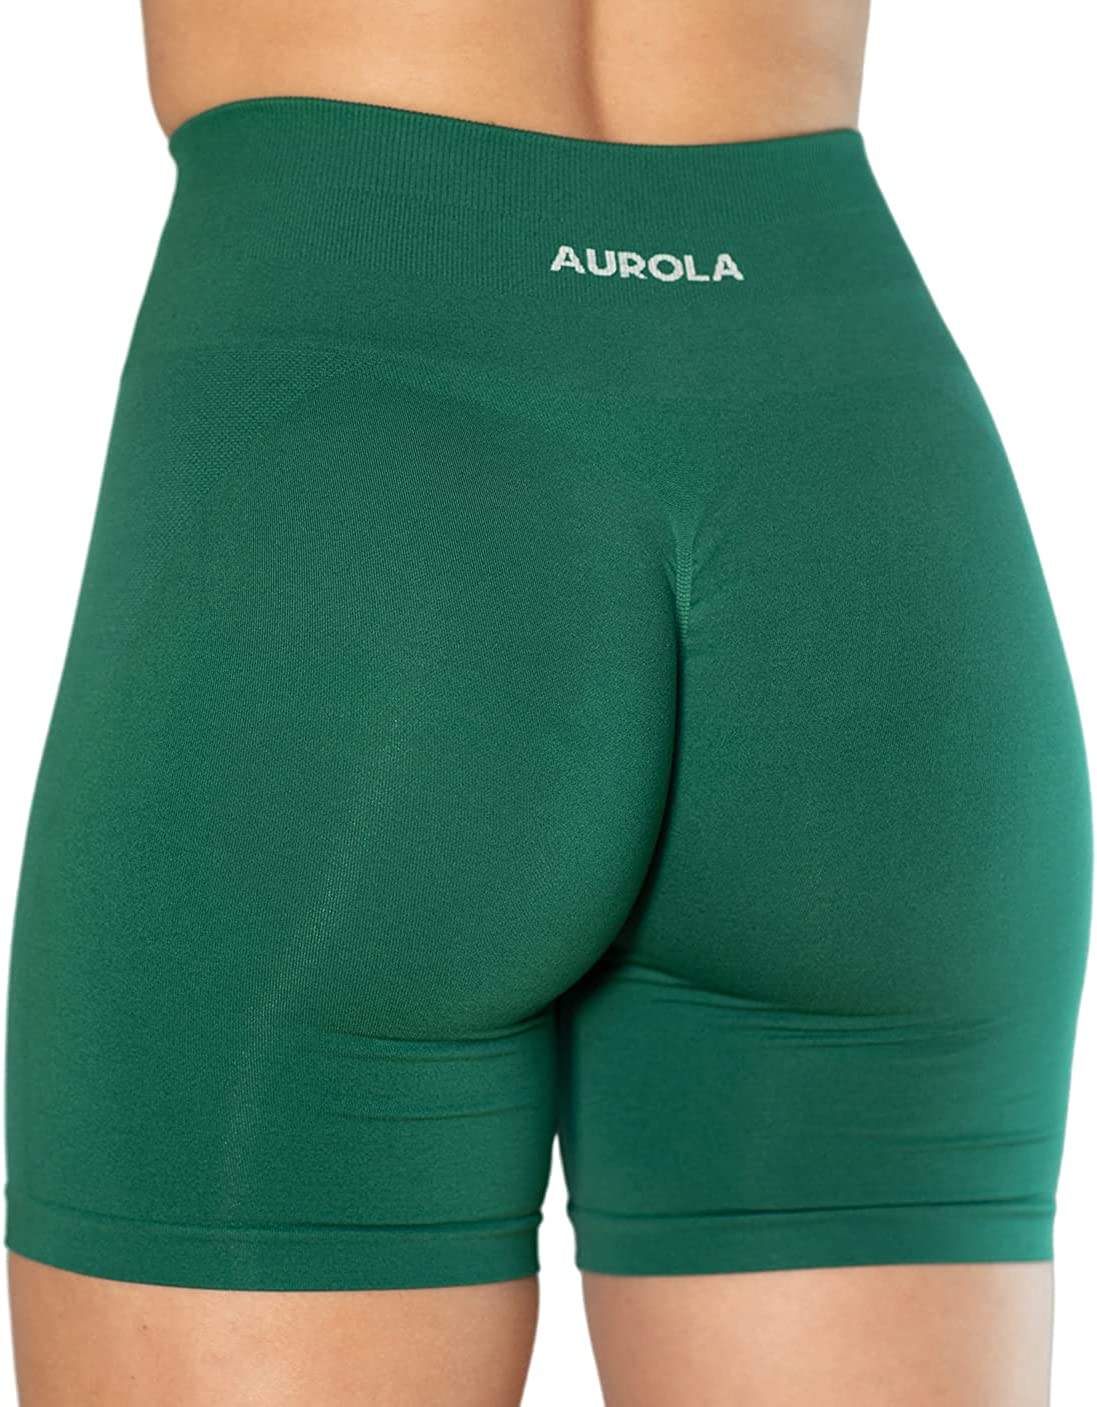 AUROLA Intensify Workout Shorts Sets for Women Seamless Scrunch Gym Yoga  Sport Active Exercise Fitness Shorts Packs, Dark Black, Small